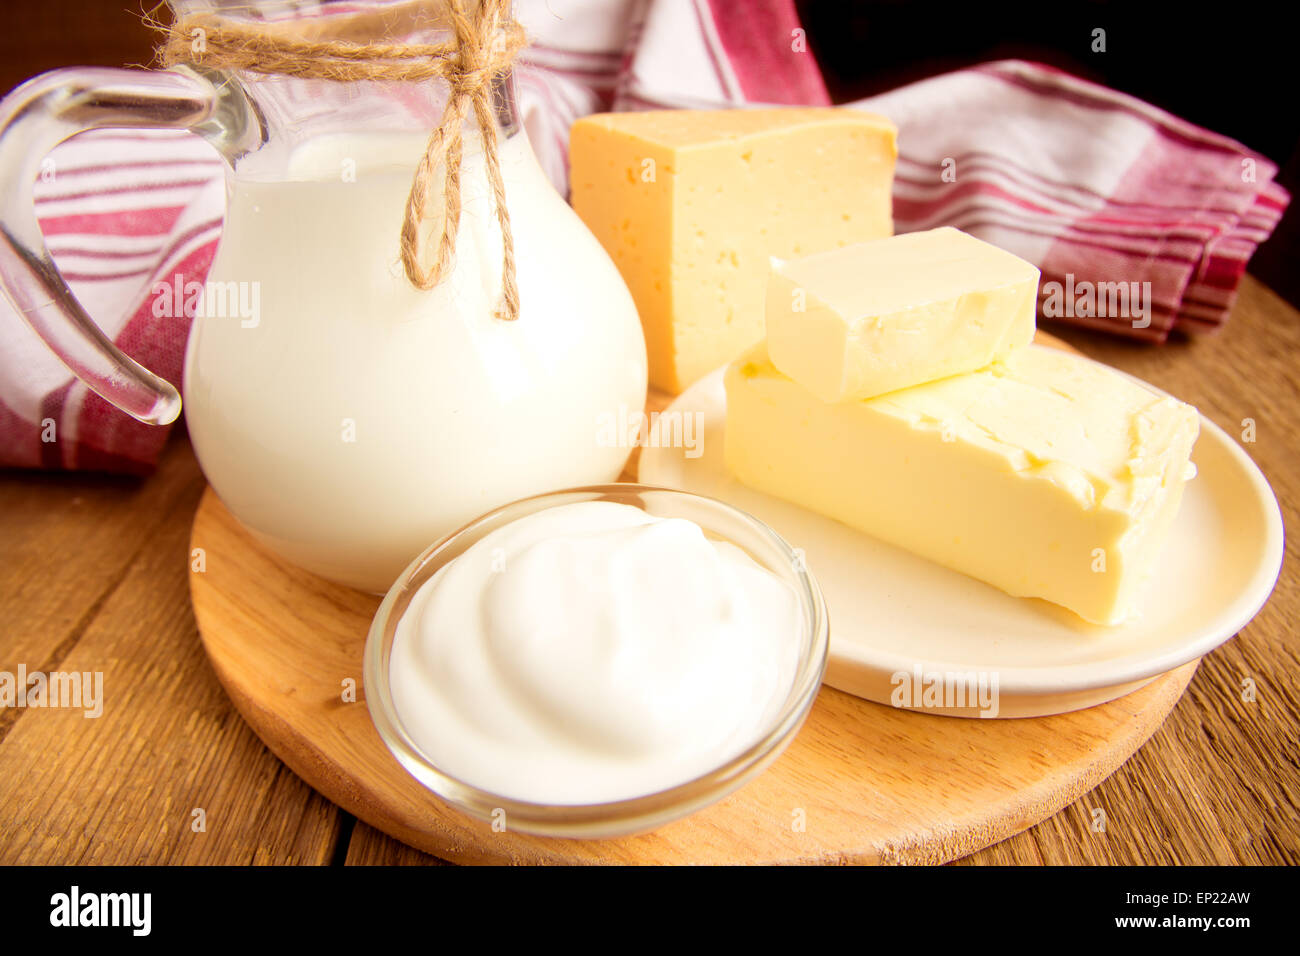 Dairy products - milk, cheese, butter, sour cream over wooden table Stock Photo